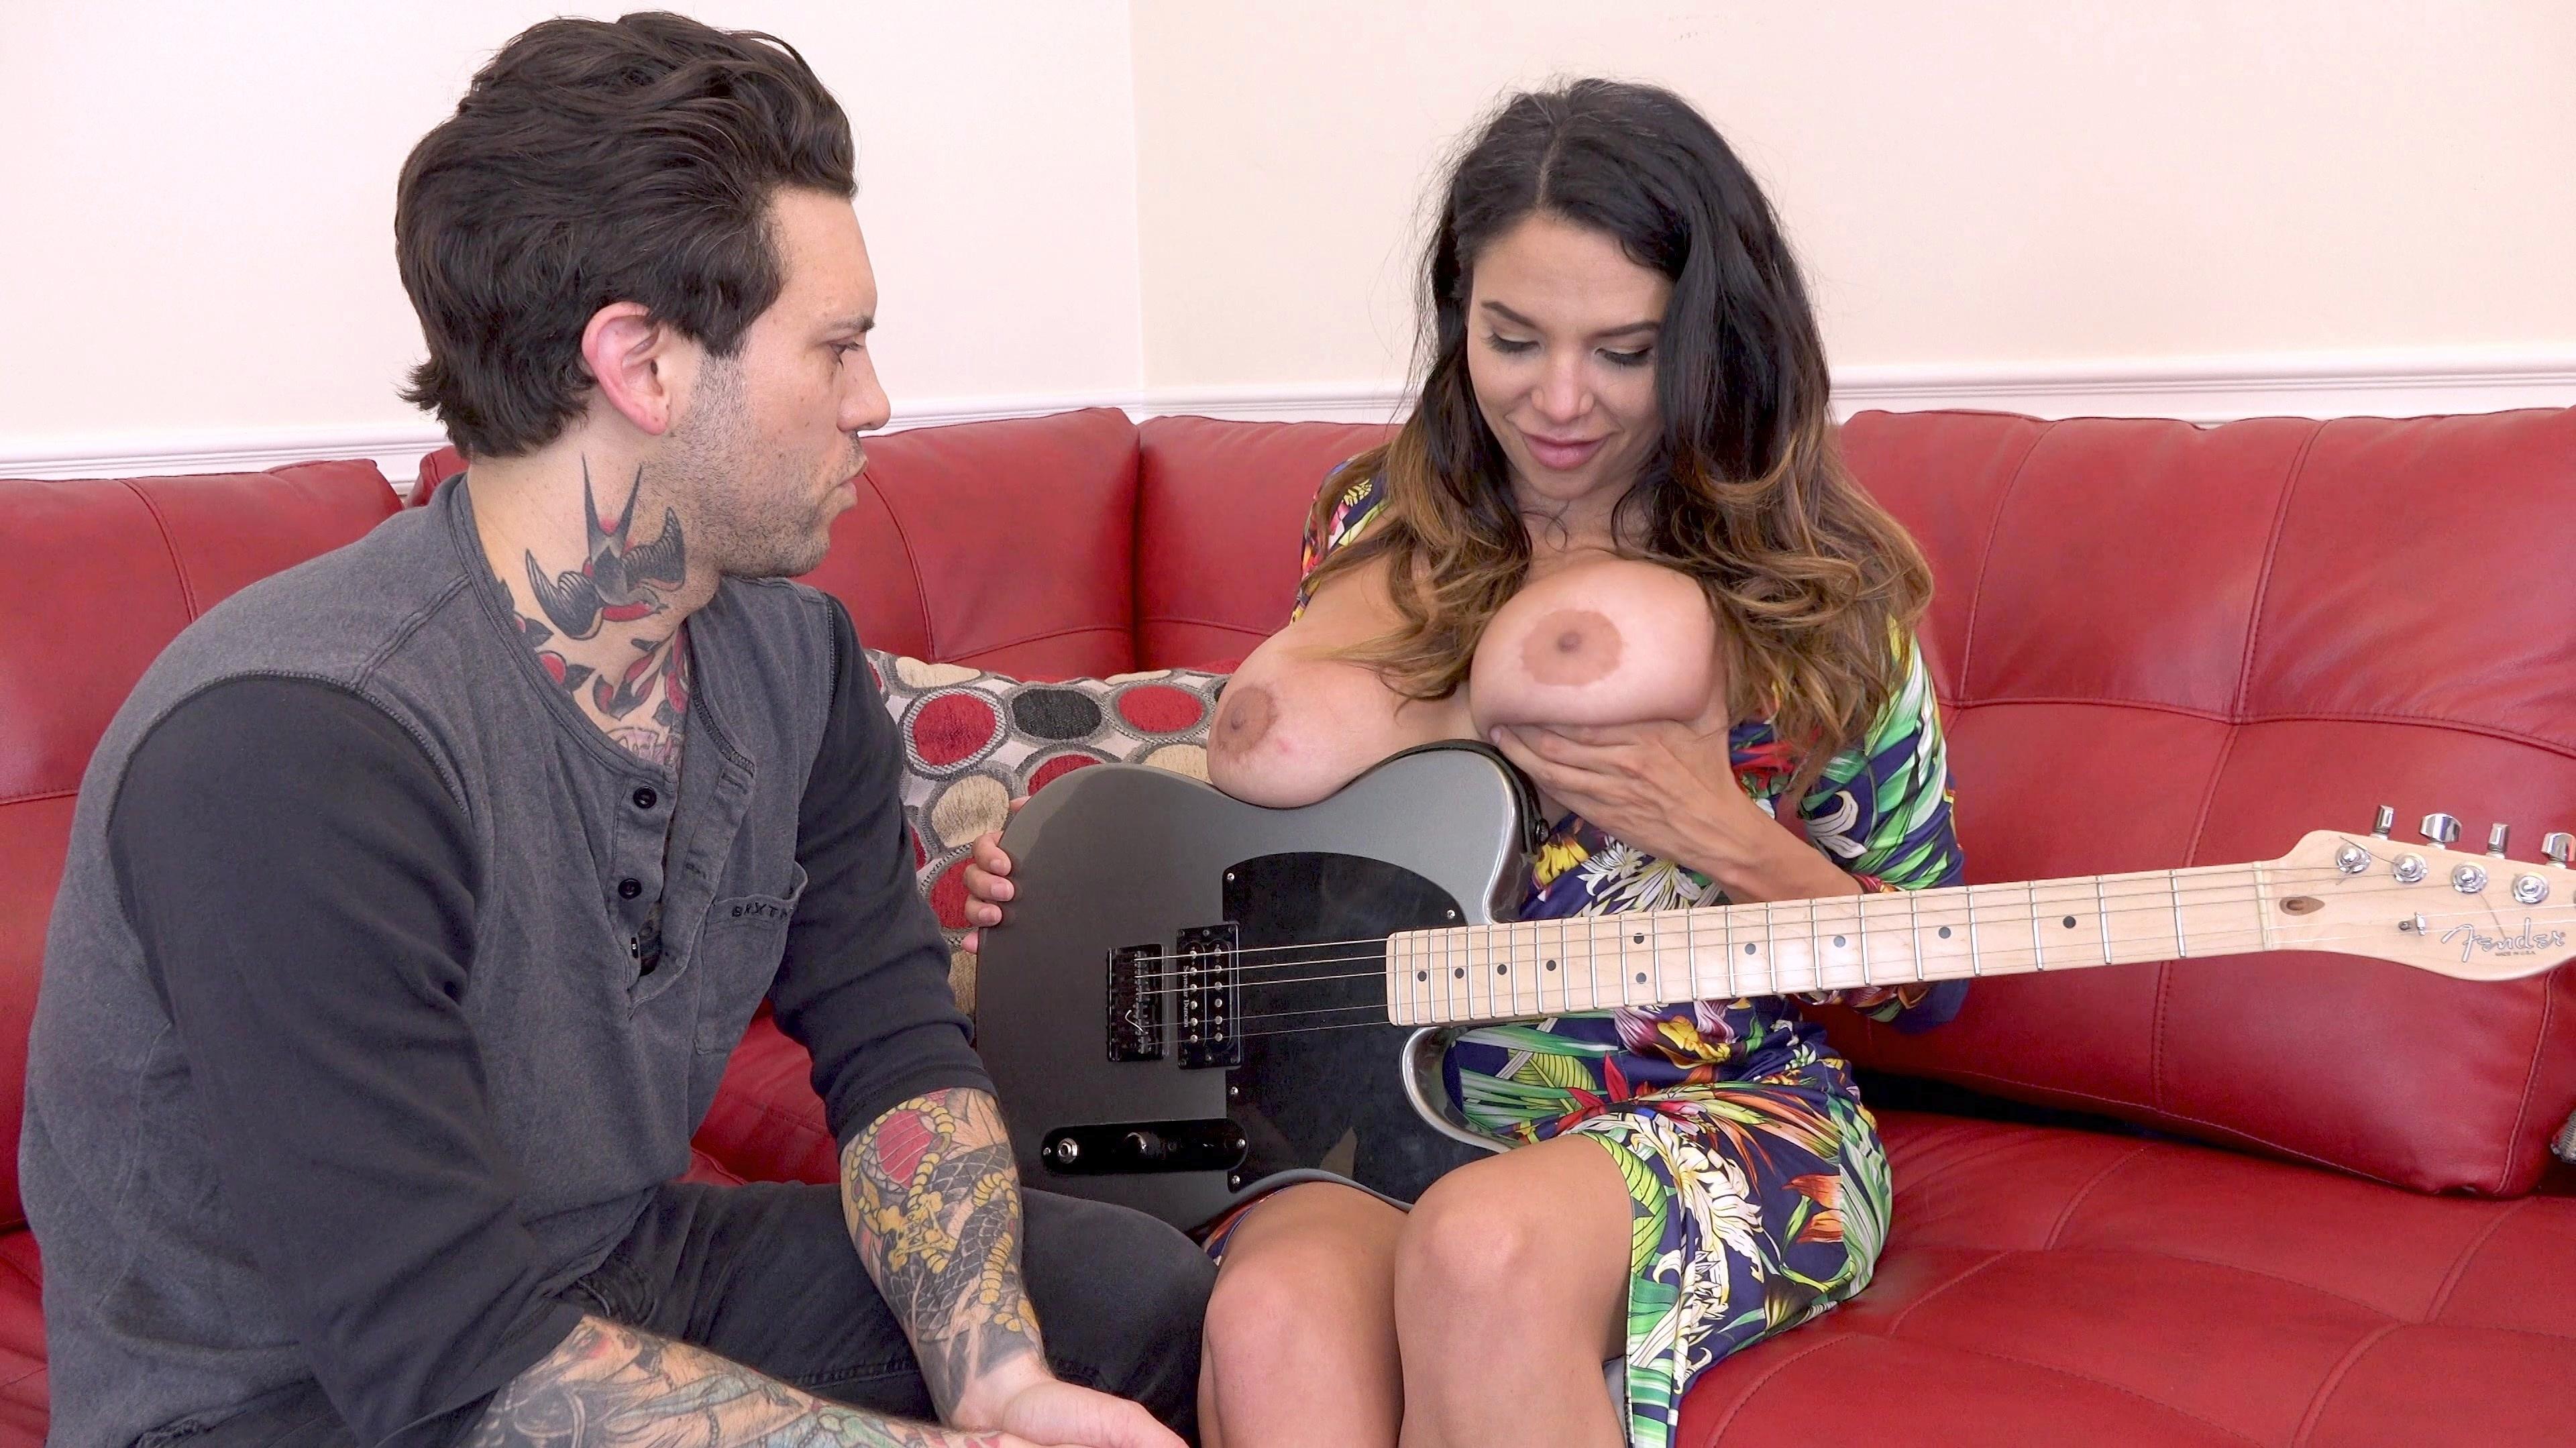 Missy Martinez Xxx Hd Video Download - Missy Martinez gets her pussy tuned by her guitar instructor | bang.com